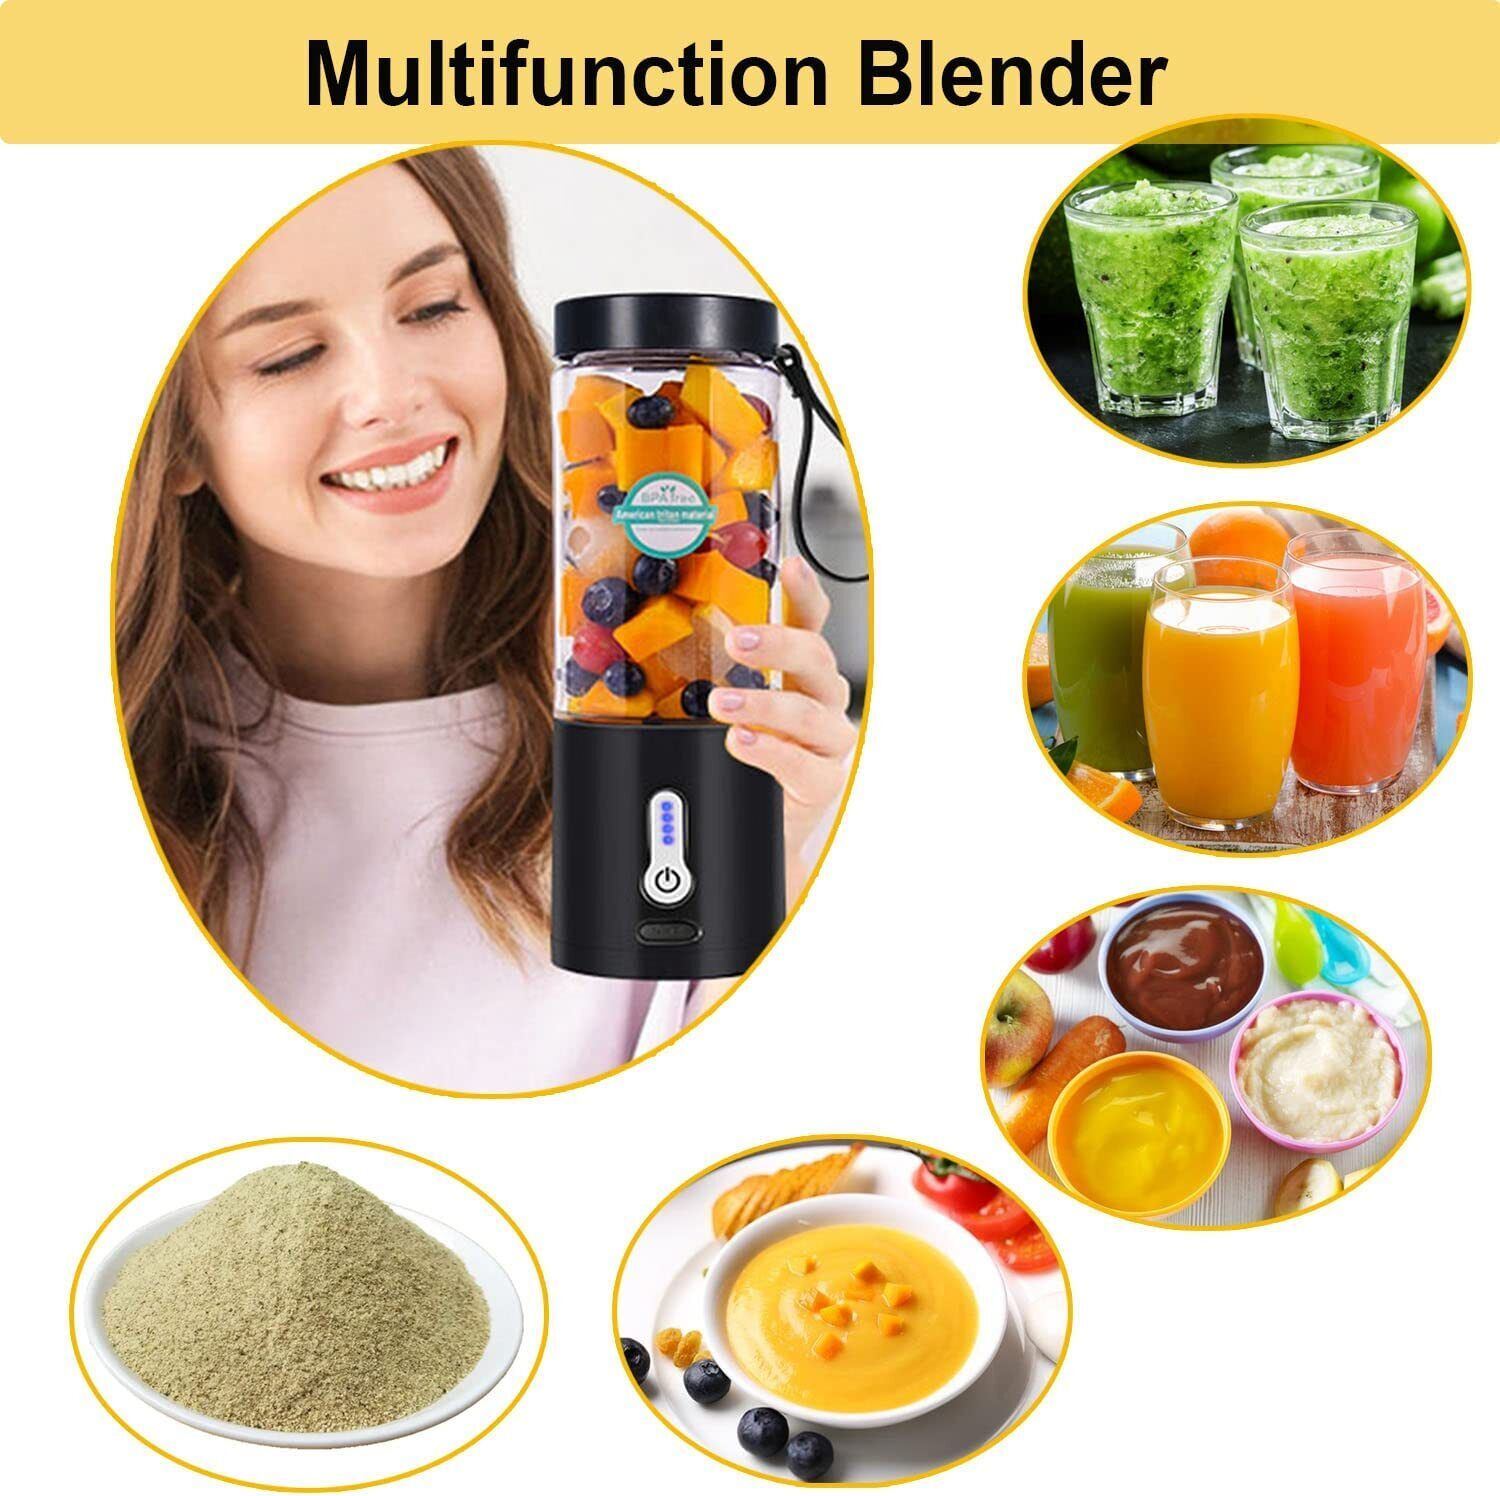 A durable Portable Blender Smoothies Fruit Vegetable Juicer Machine USB Rechargeable Mixer with stainless steel blades, made of food-grade materials, accompanied by fresh fruit and a spoon.